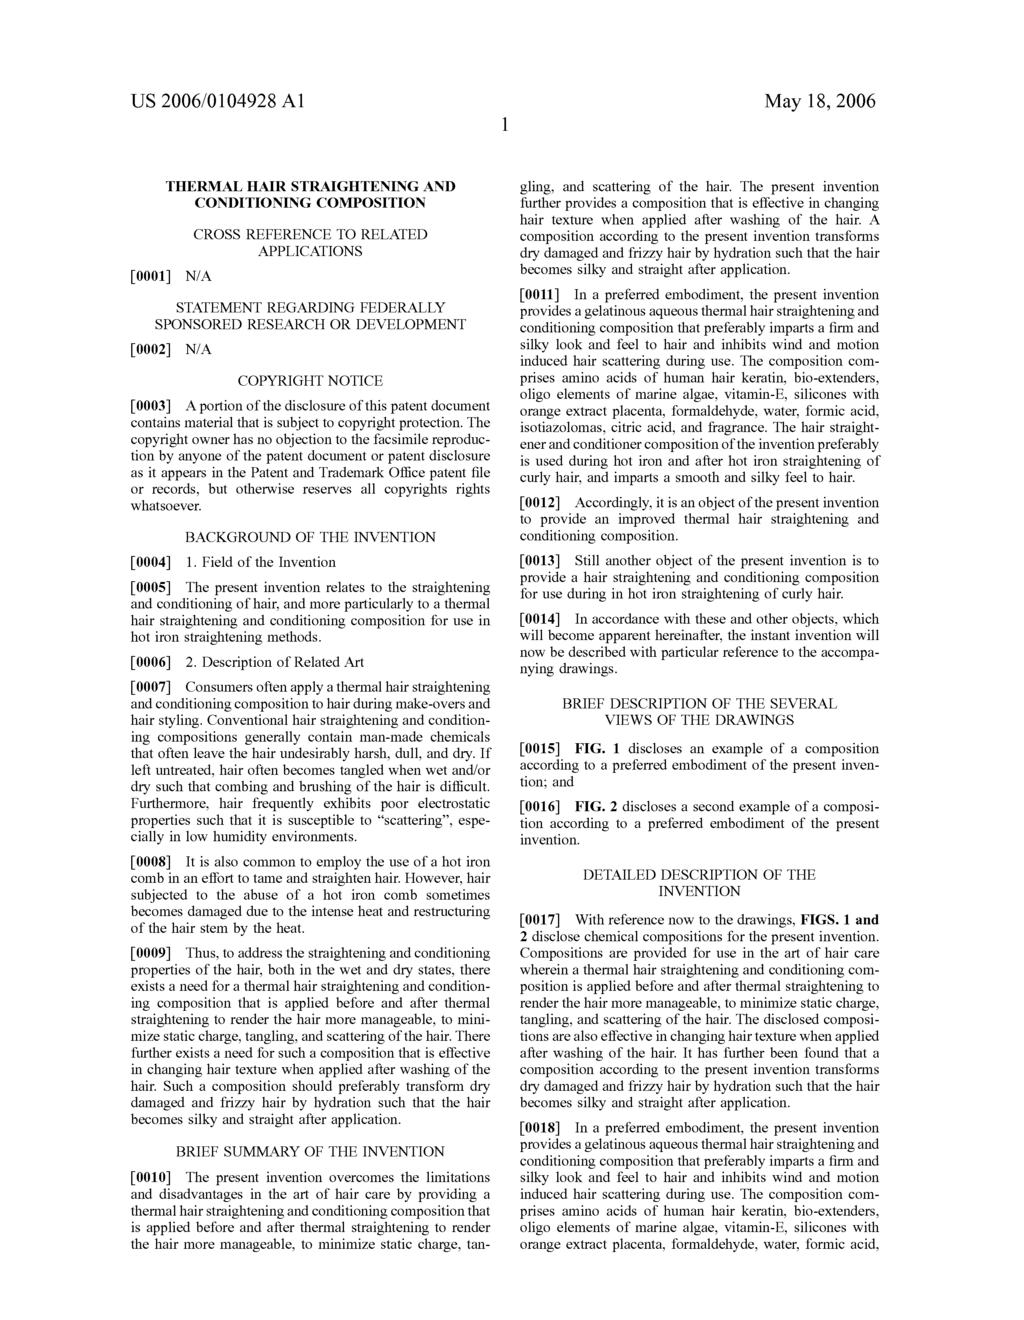 US 2006/01 04928A1 May 18, 2006 THERMAL HAIR STRAIGHTENING AND CONDITIONING COMPOSITION CROSS REFERENCE TO RELATED APPLICATIONS 0001 N/A STATEMENT REGARDING FEDERALLY SPONSORED RESEARCH OR